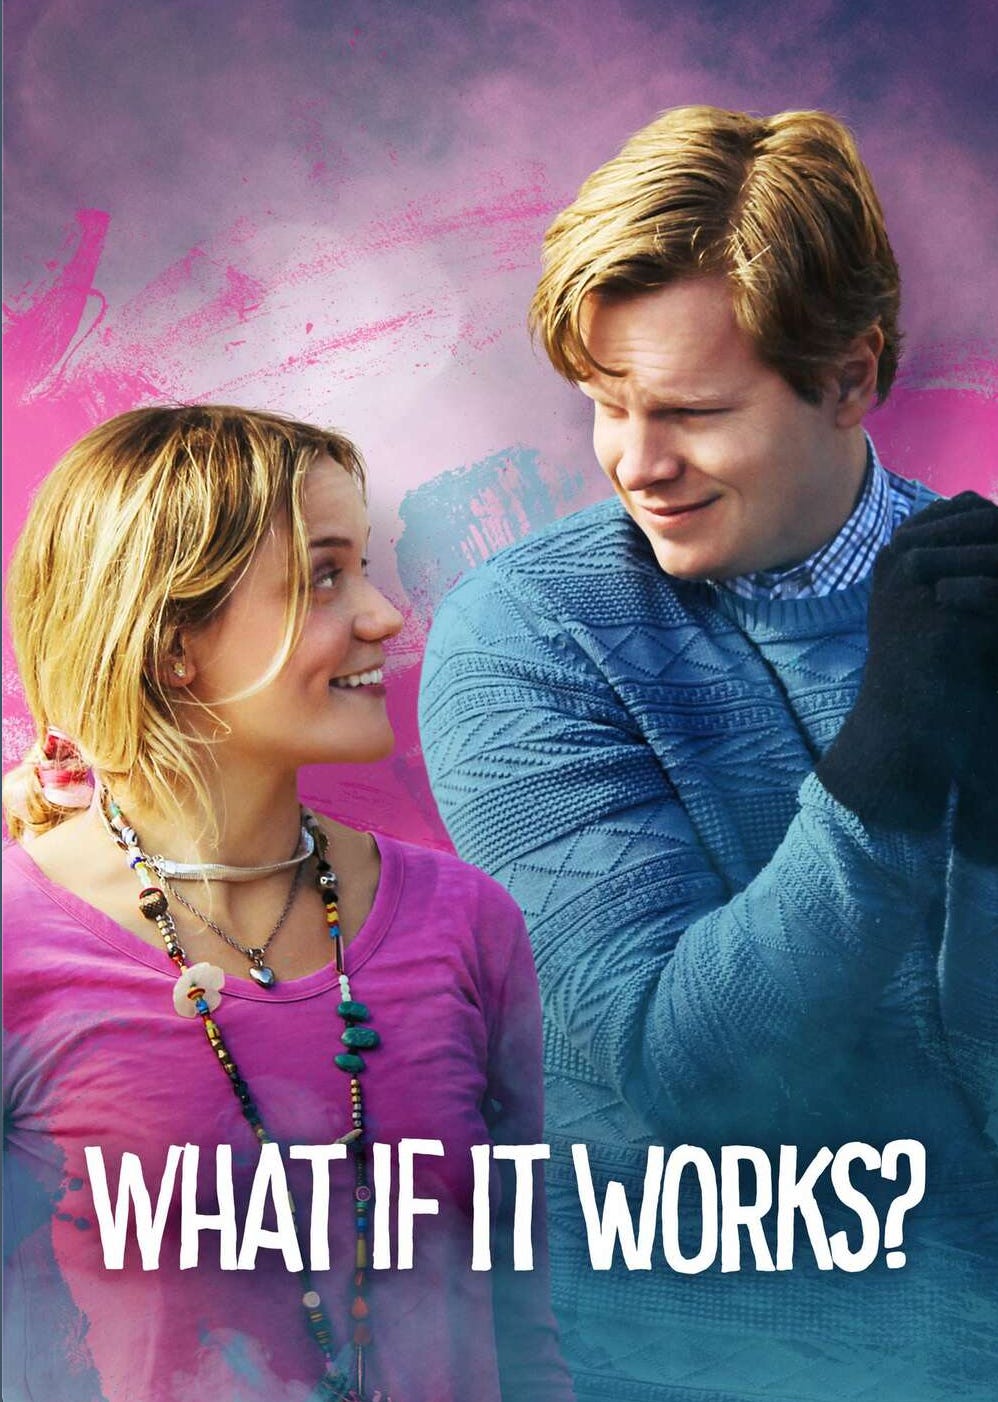 Cover image of What if it Work showing Grace and Adrian looking at each other.